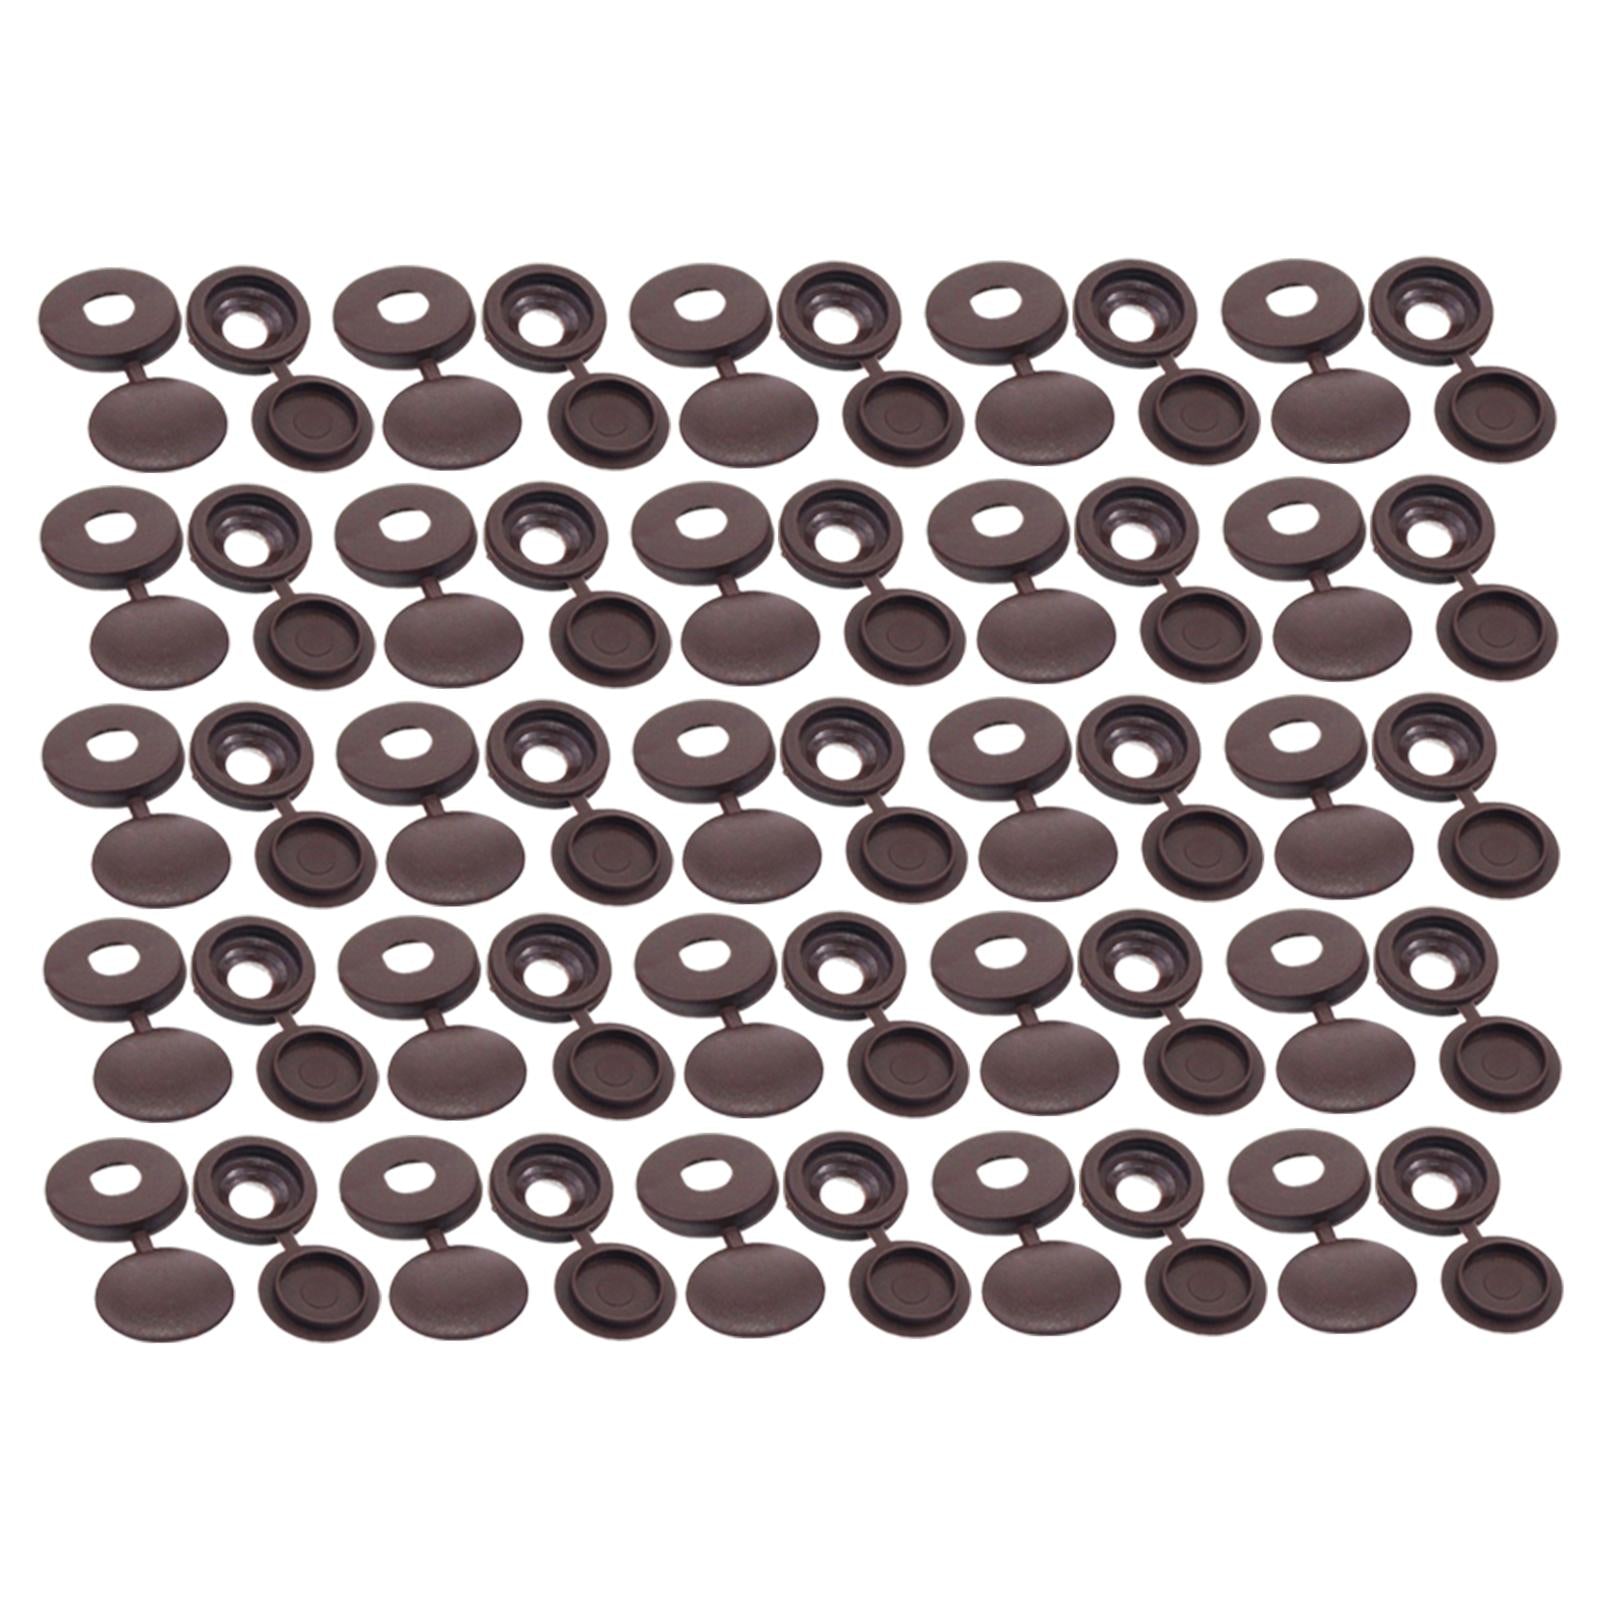 100 Pieces Screw Covers, Practical Screws Caps for Replacement Tools Yard Brown